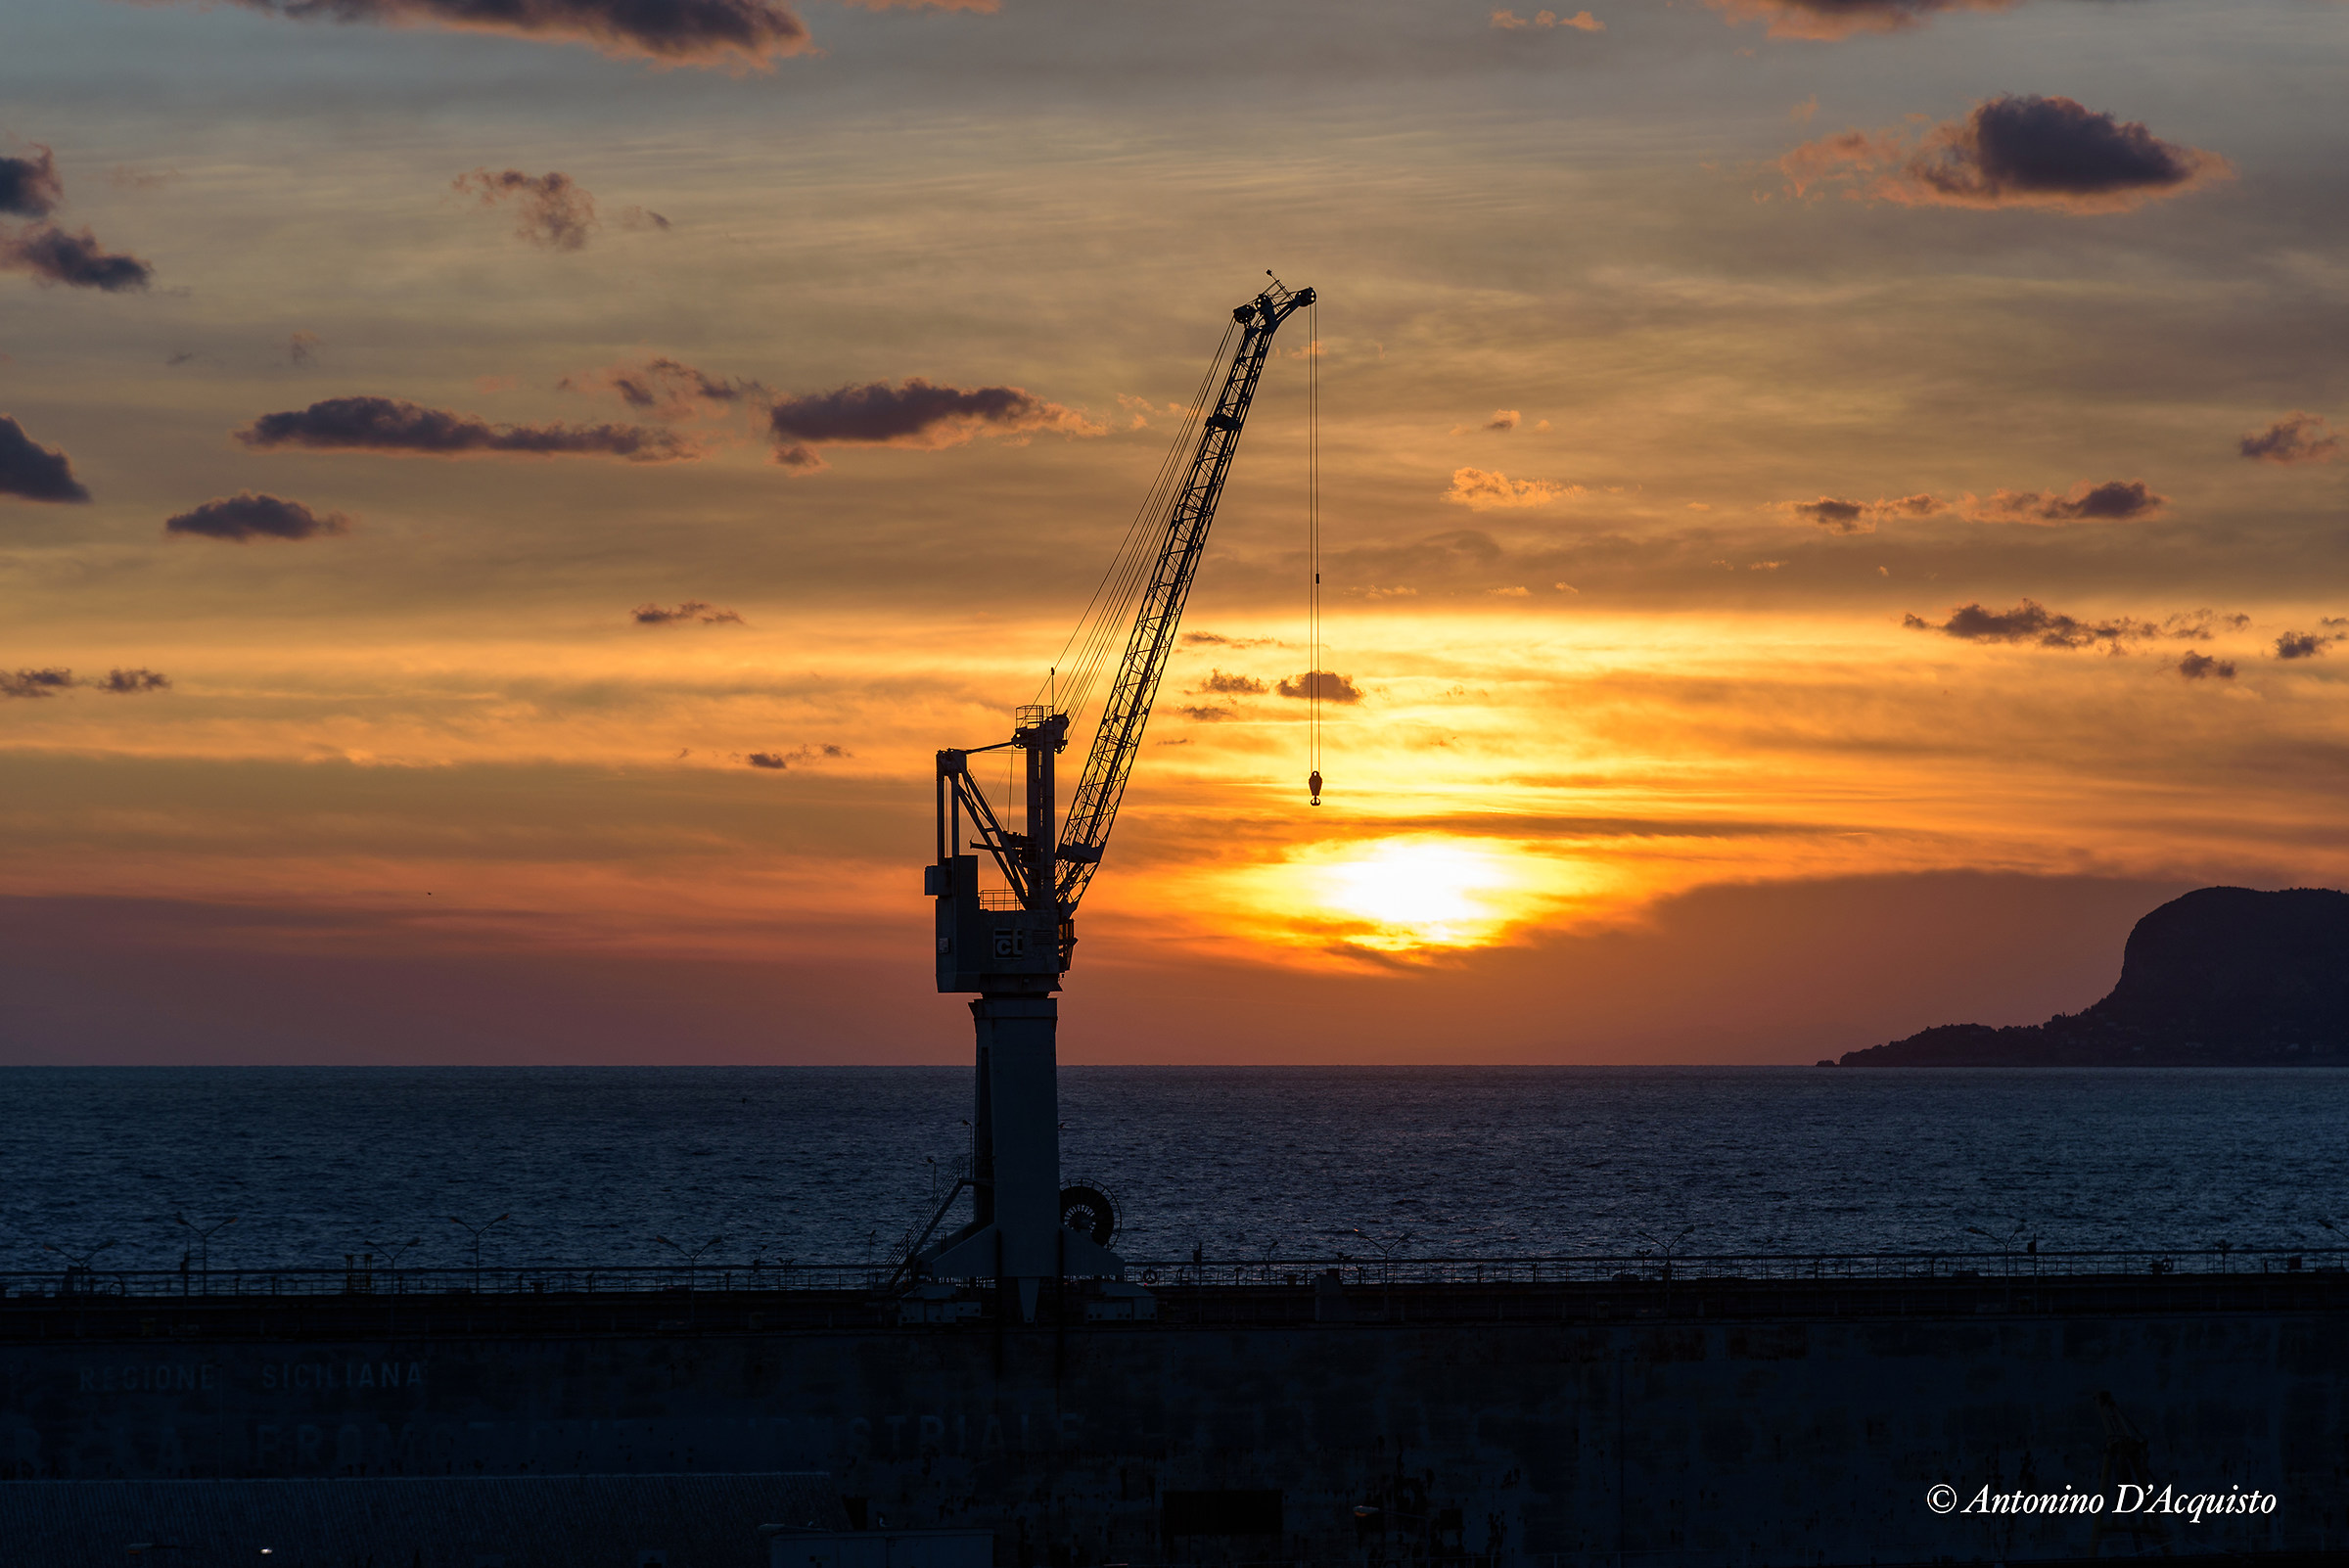 The Sun and the crane...